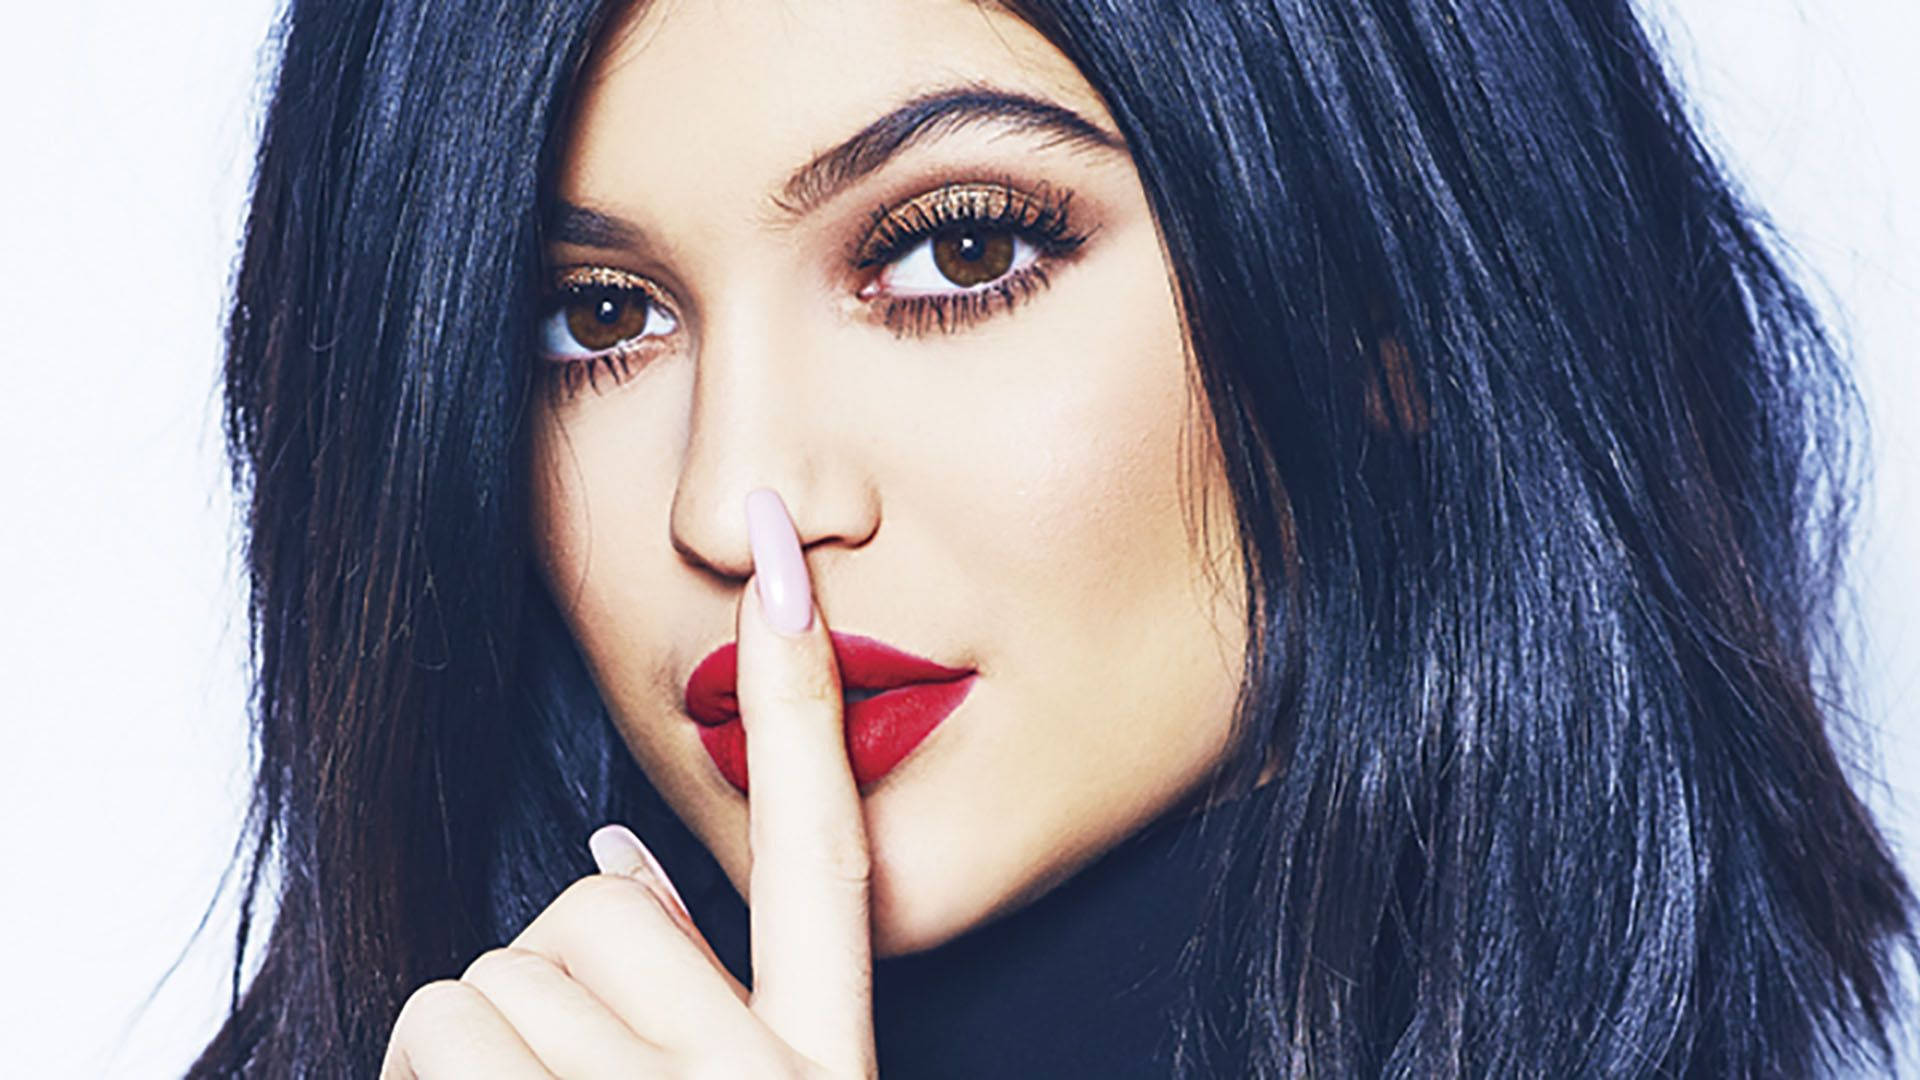 Cute Kylie Jenner In Red Lipstick Wallpaper